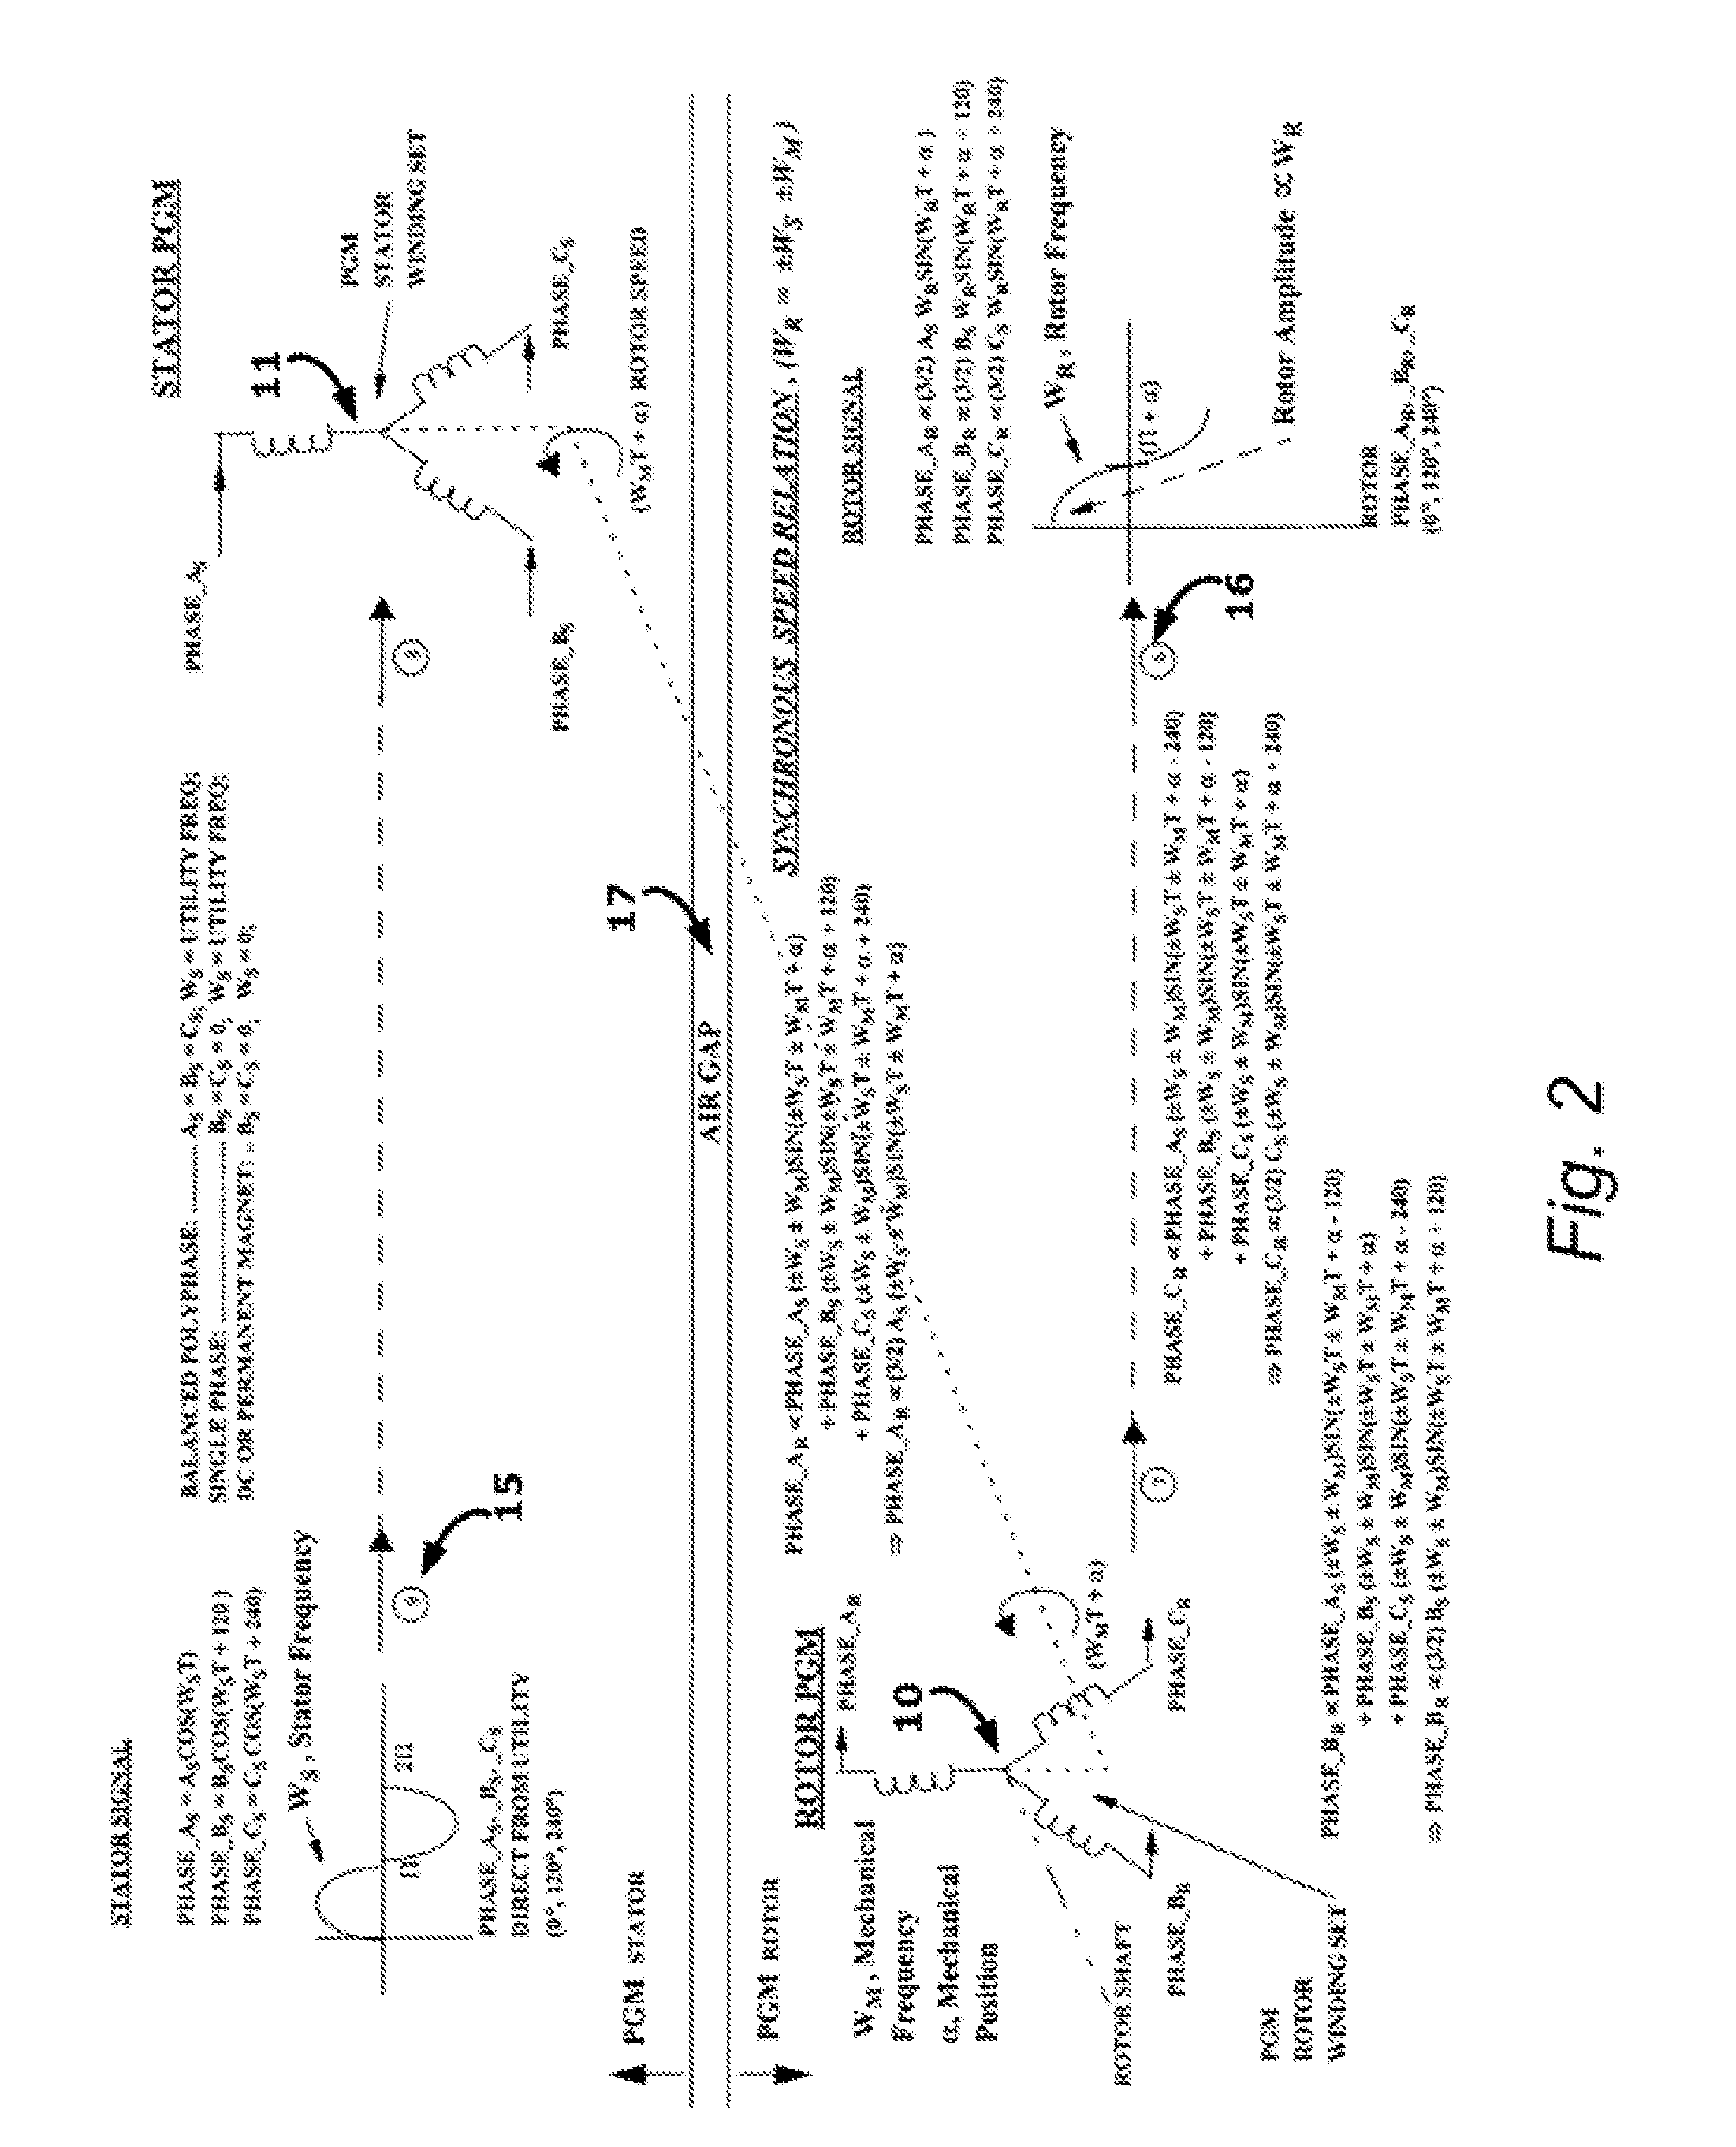 Brushless Multiphase Self-Commutation Control (or BMSCC) And Related Inventions